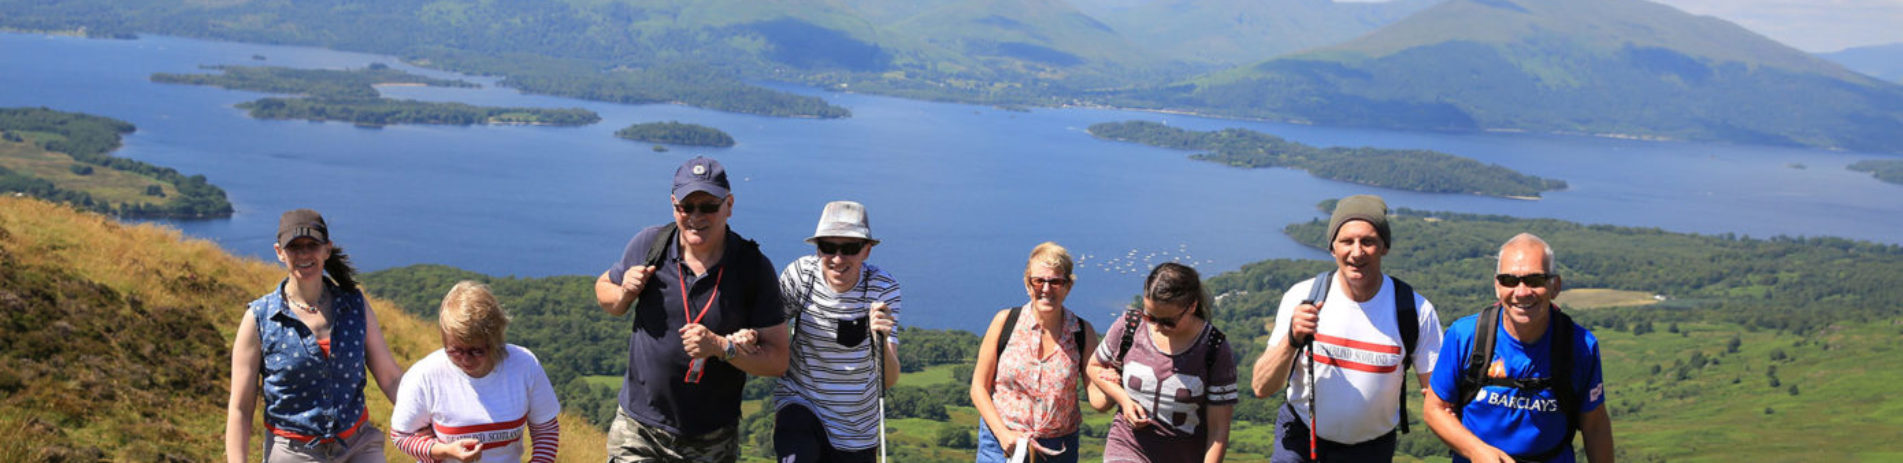 deaf-blind-group-of-men-and-women-walk-up-conic-hill-with-stunning-views-of-loch-lomond-and-islands-behind